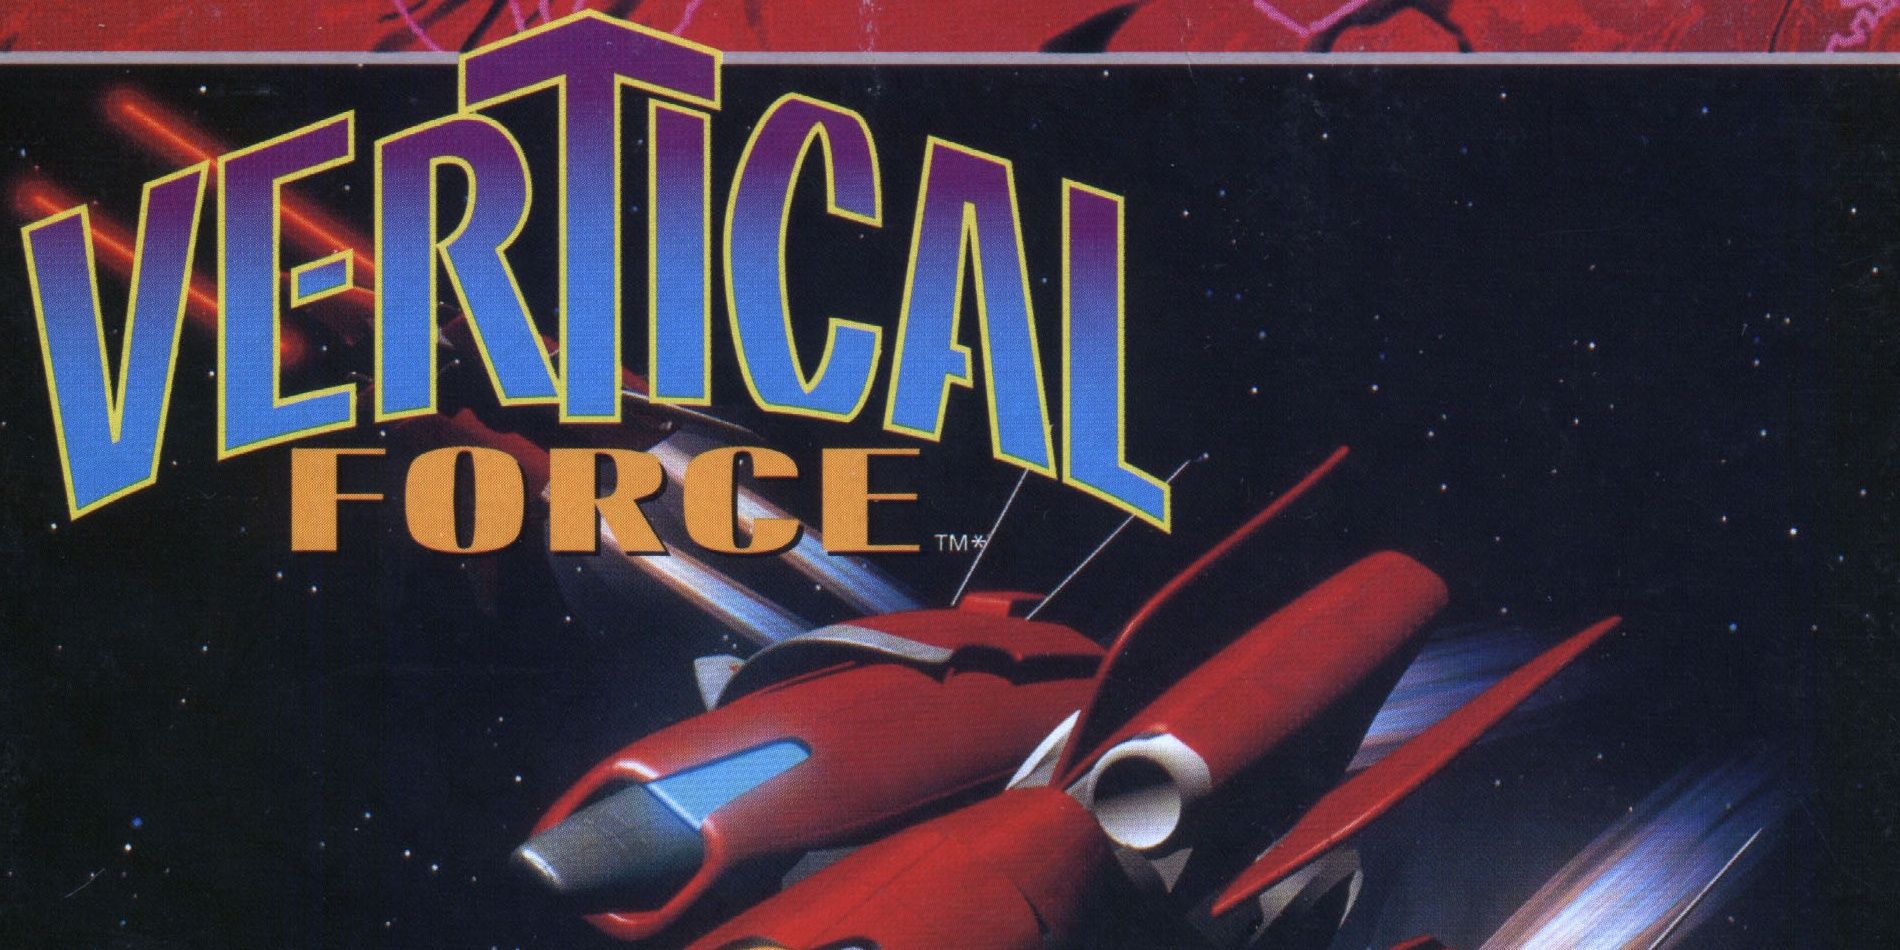 Box art for Vertical Force for the Virtual Boy